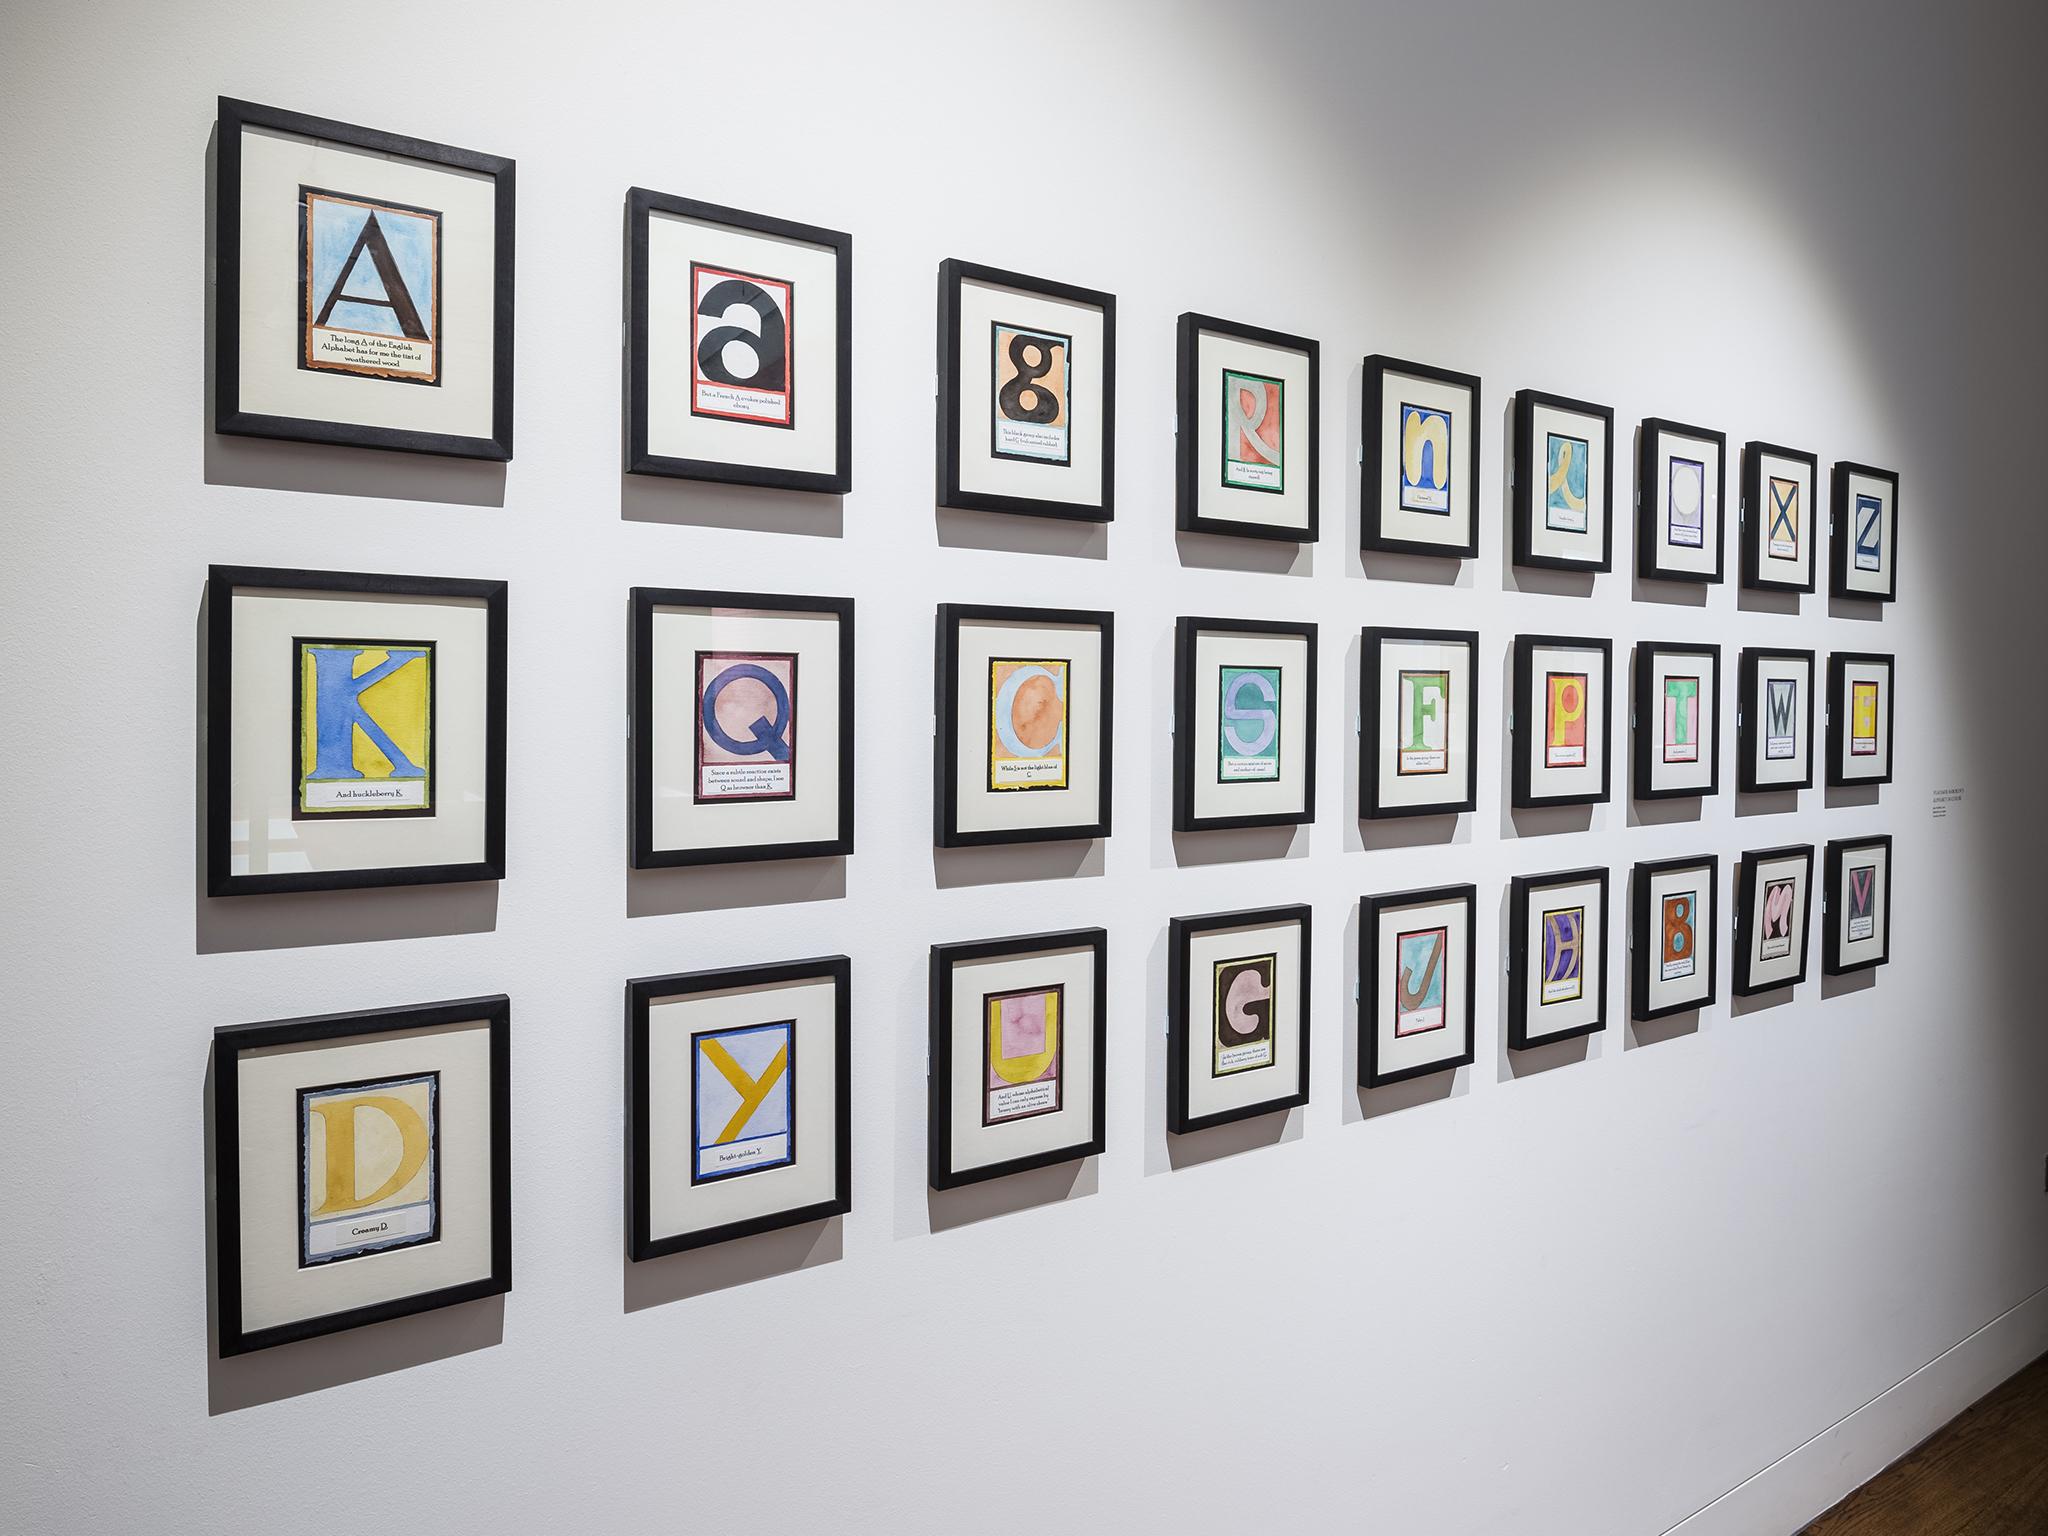 ‘Alphabet in Colour’ by Vladimir Nabokov, as interpreted by Jean Holabird. Examples of how someone with Synaesthesia might see letters